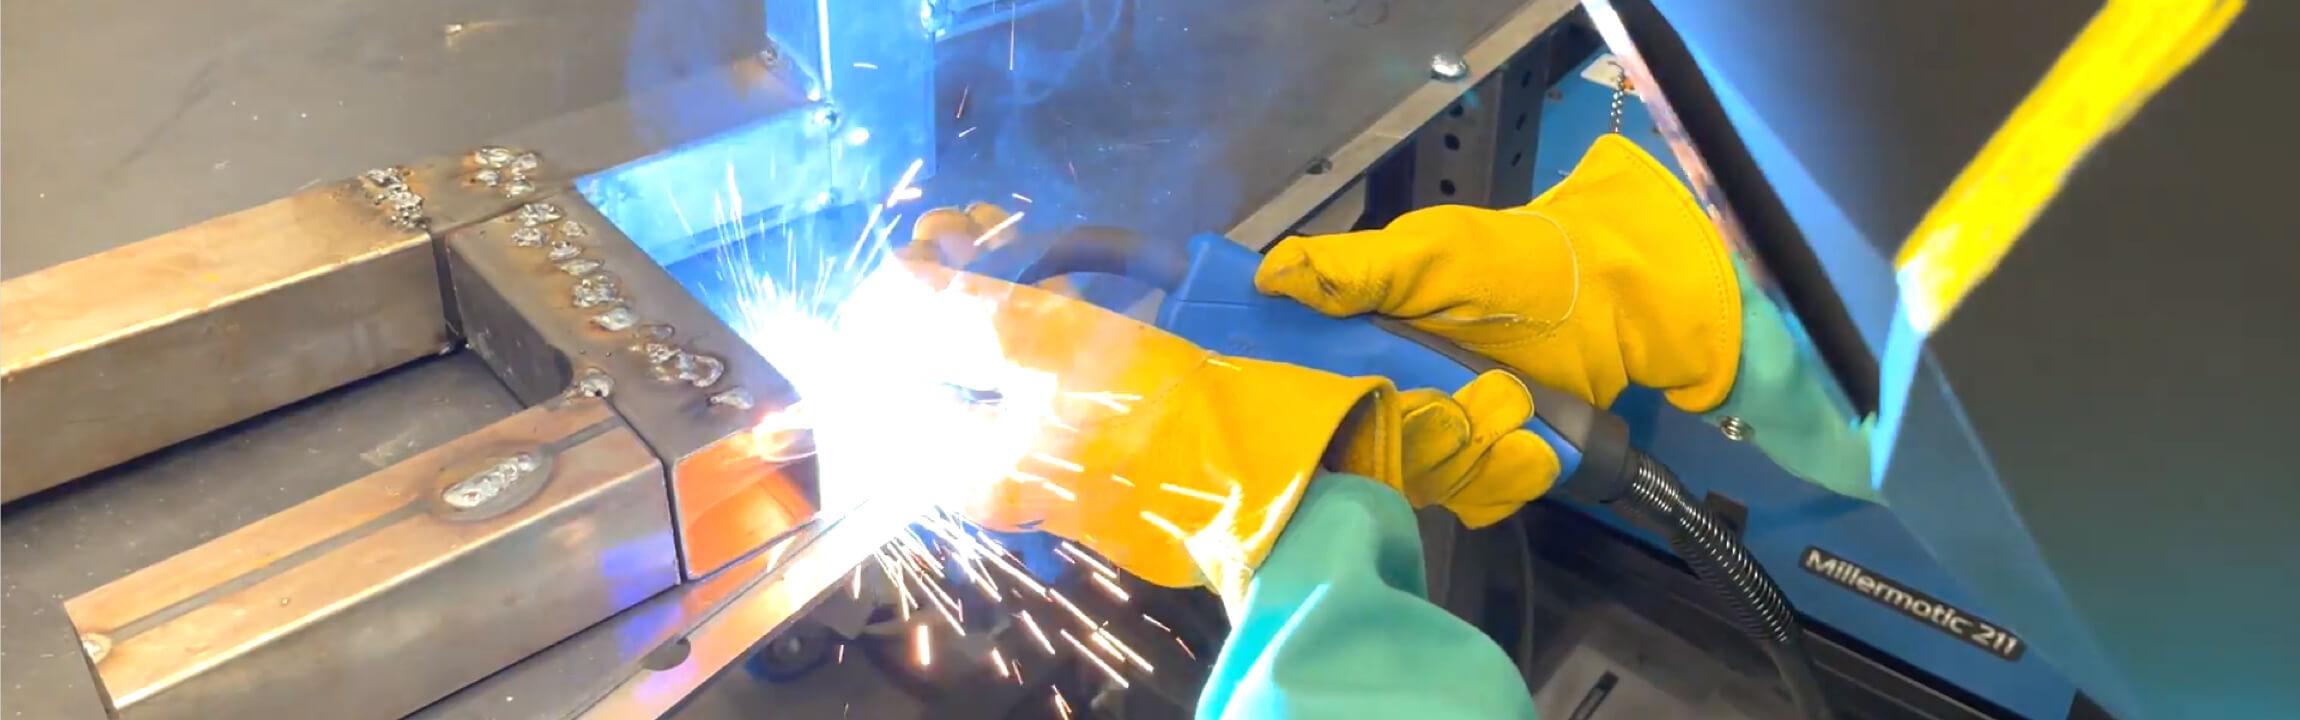 Mastering the Craft: Iron Fabrication Techniques in Sacramento - RED VISION  EXPERTS